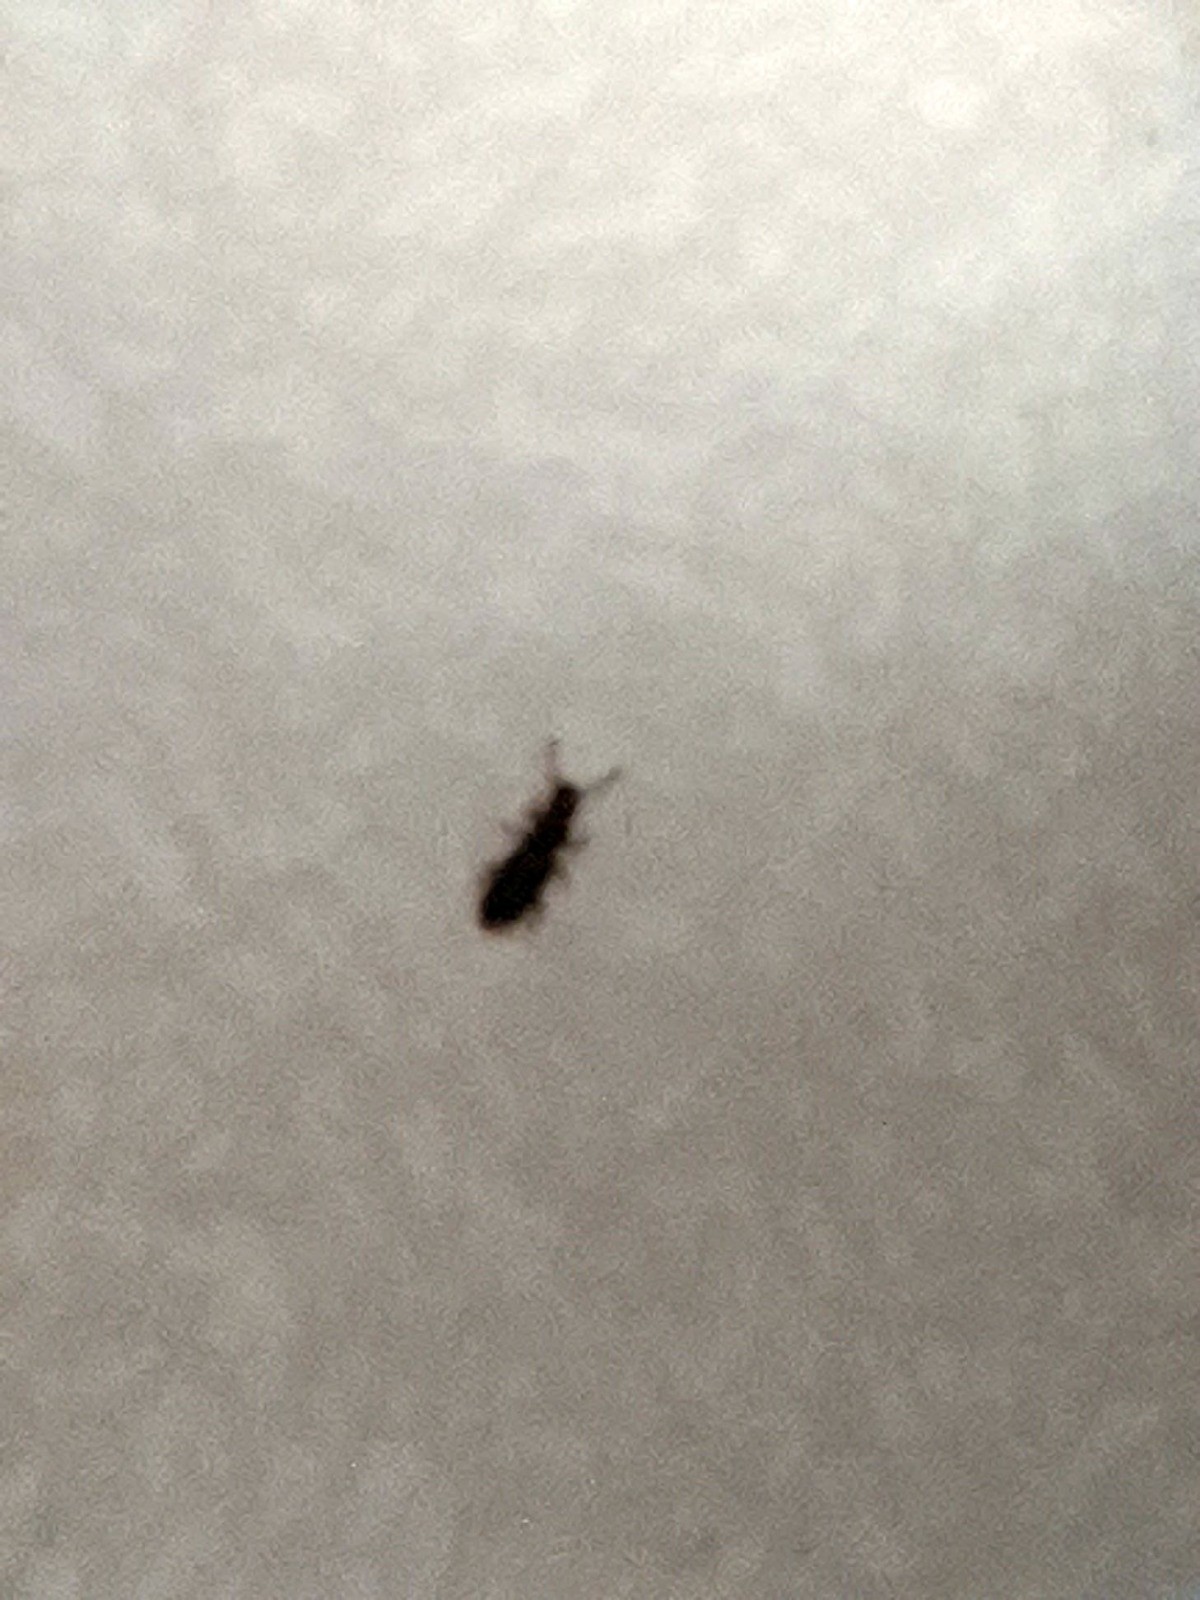 Small Black Bugs In Pantry Foods, Little Black Bugs In Kitchen Cabinets